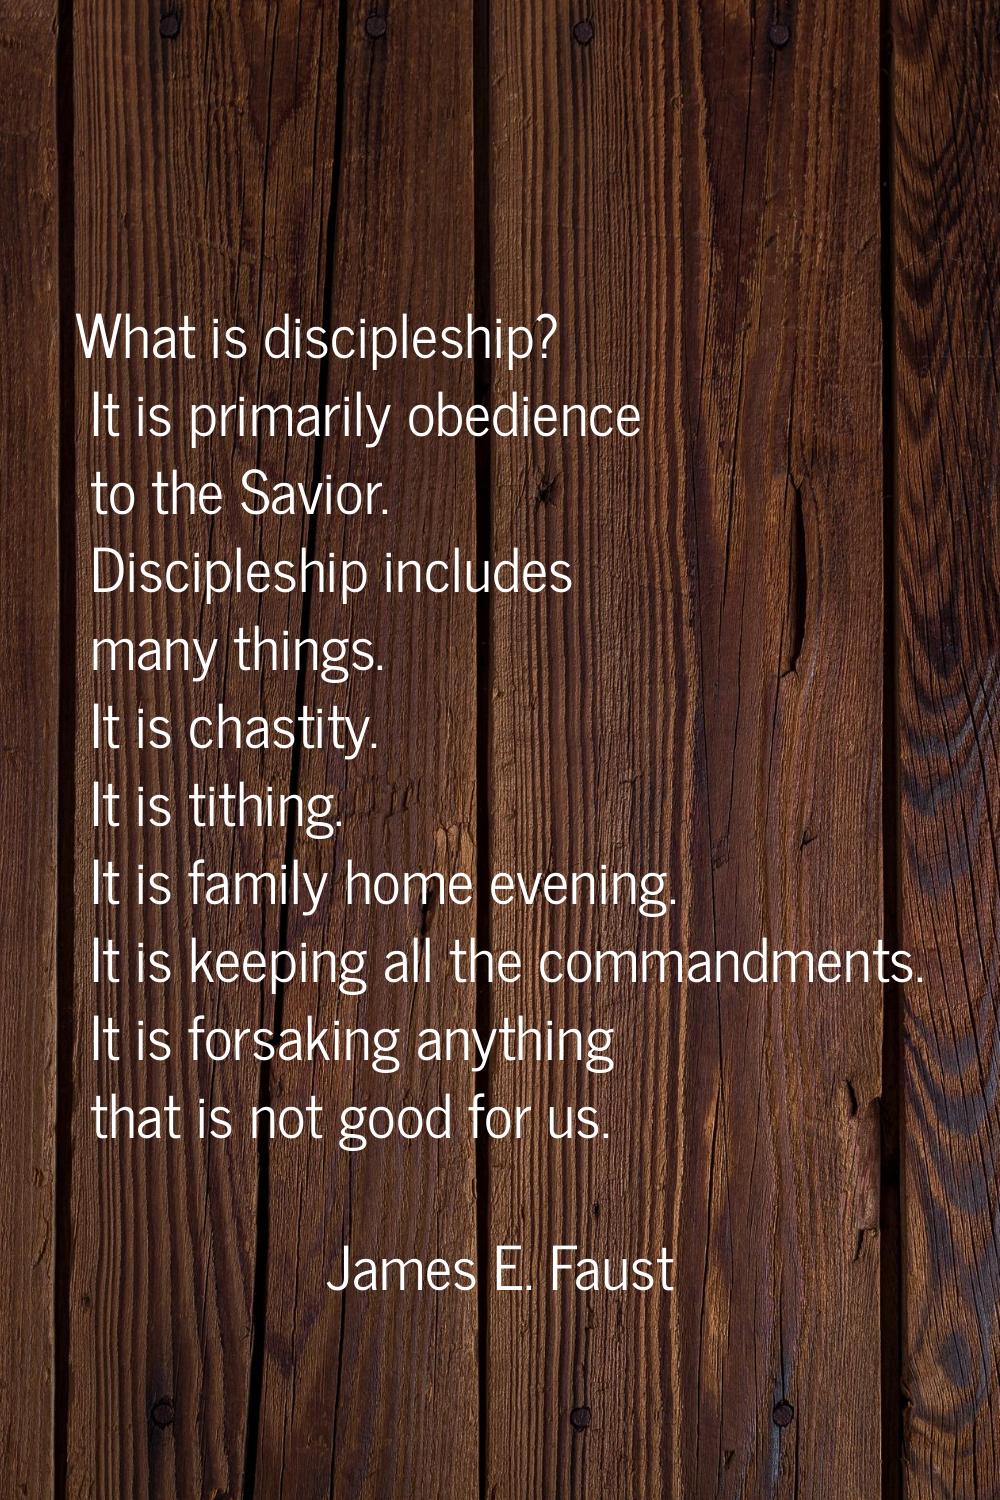 What is discipleship? It is primarily obedience to the Savior. Discipleship includes many things. I